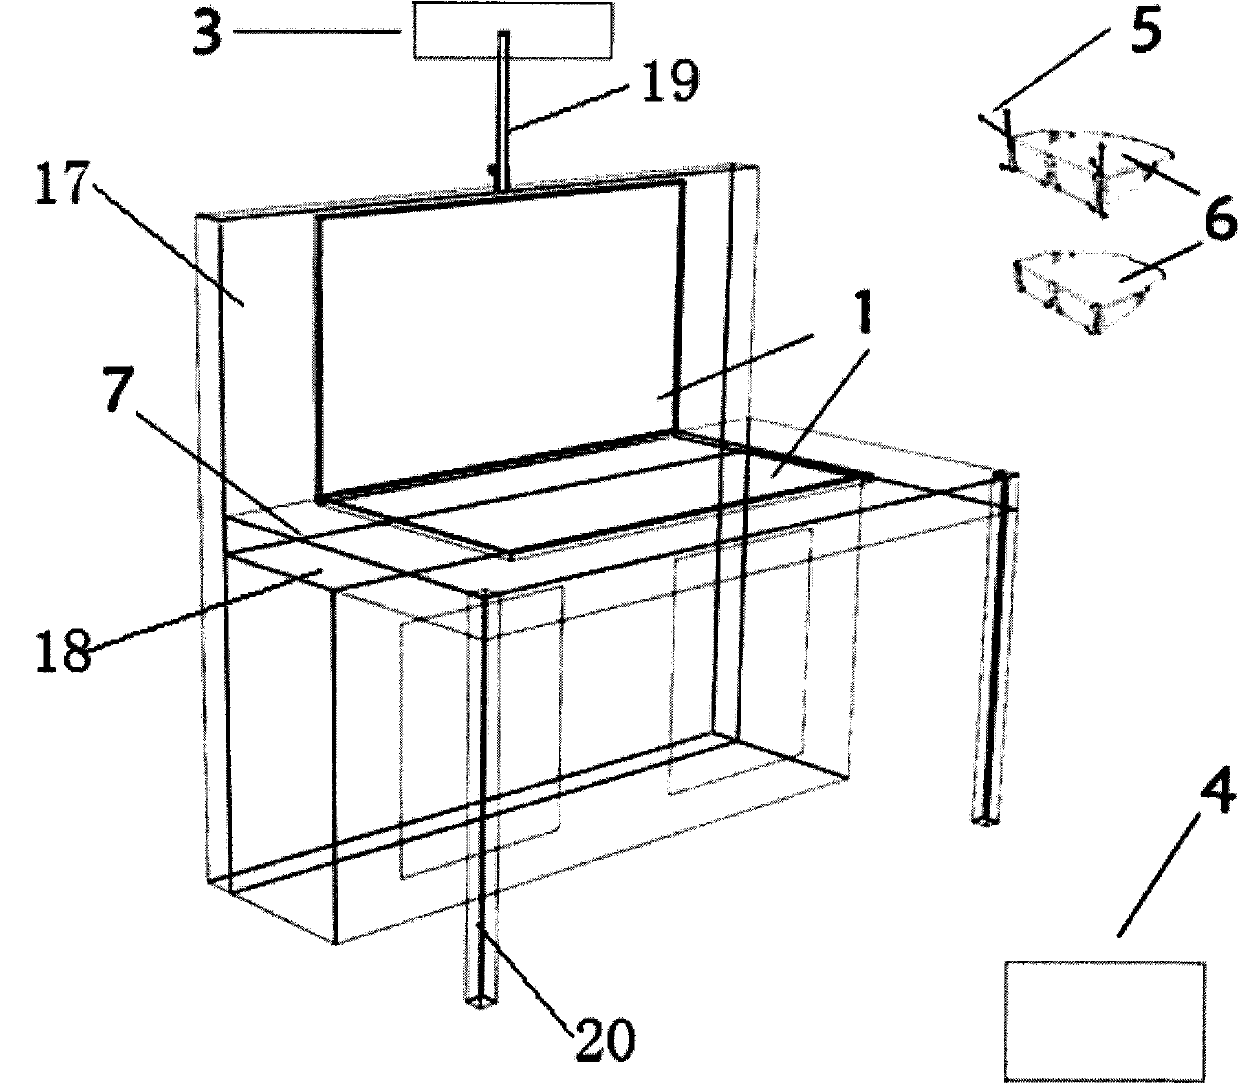 Stereo display system